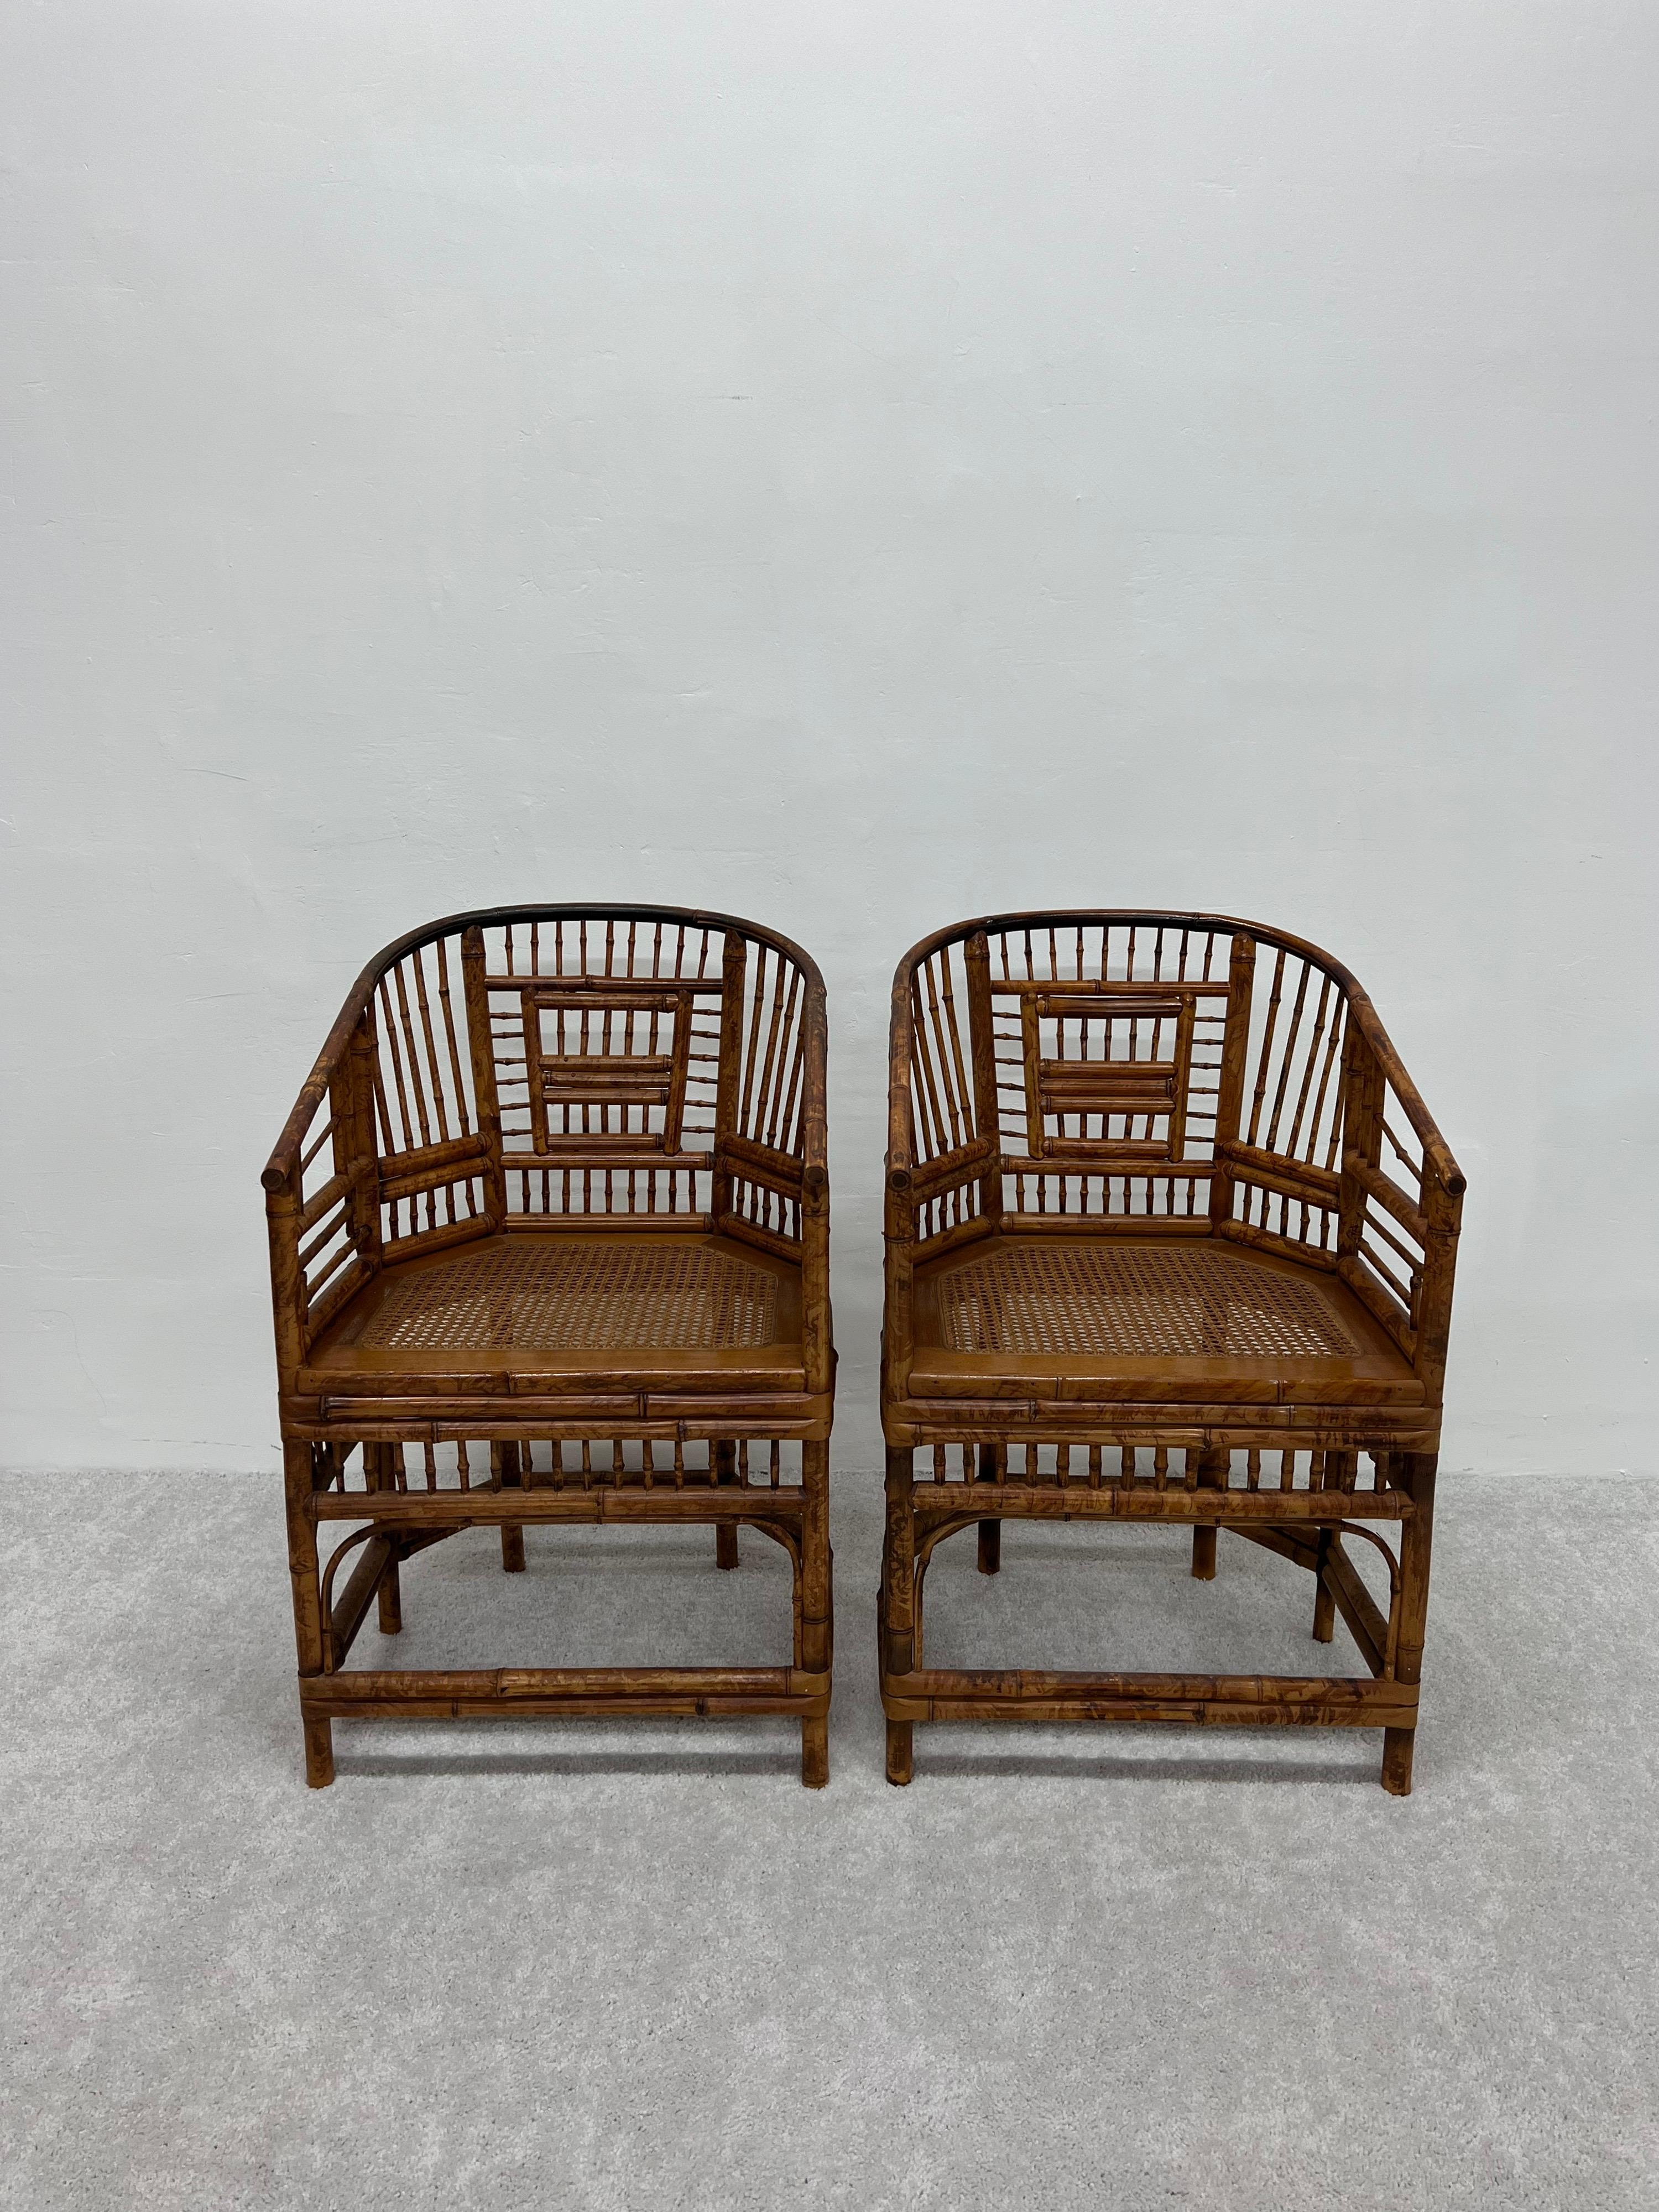 Pair of mid-century British Colonial dining or side chairs with tortoise style finish bamboo frames and rattan cane seats by Brighton Pavillion, 1970s.